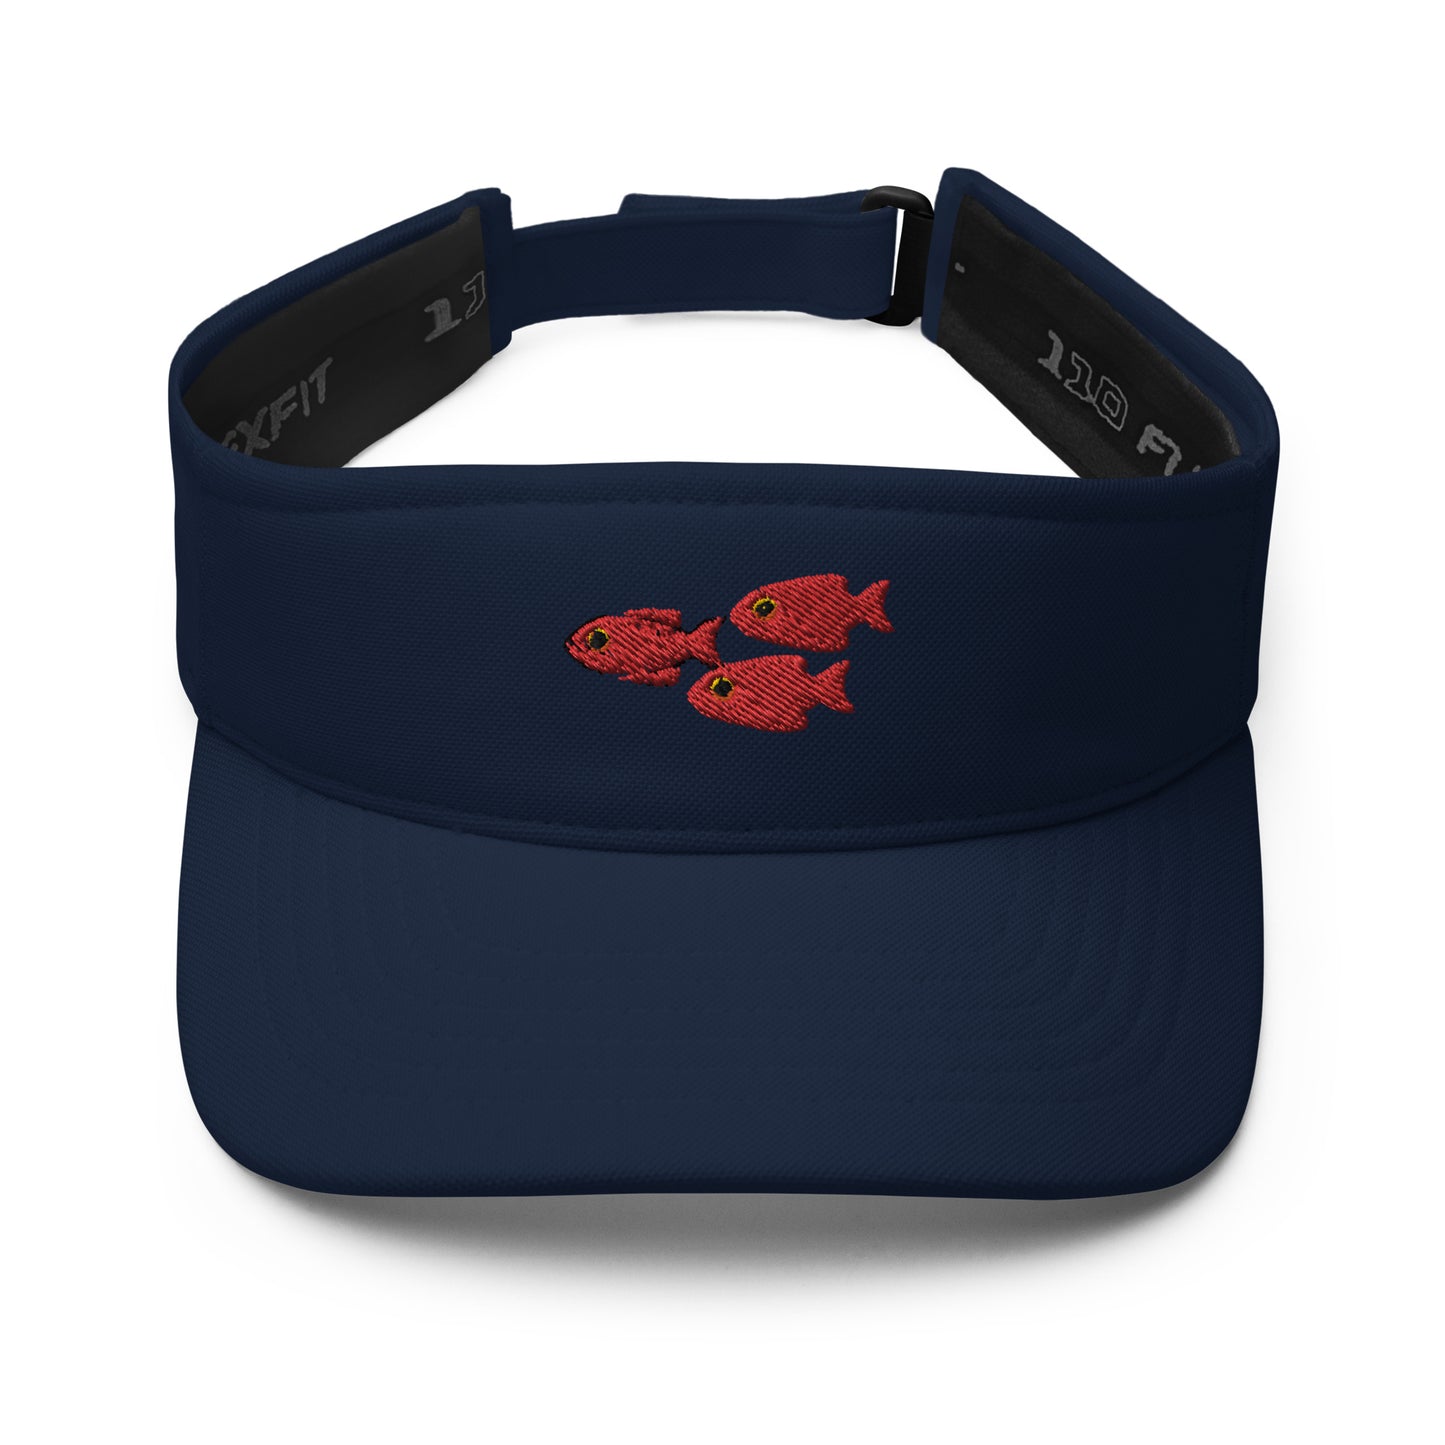 Visor embroidered with fish